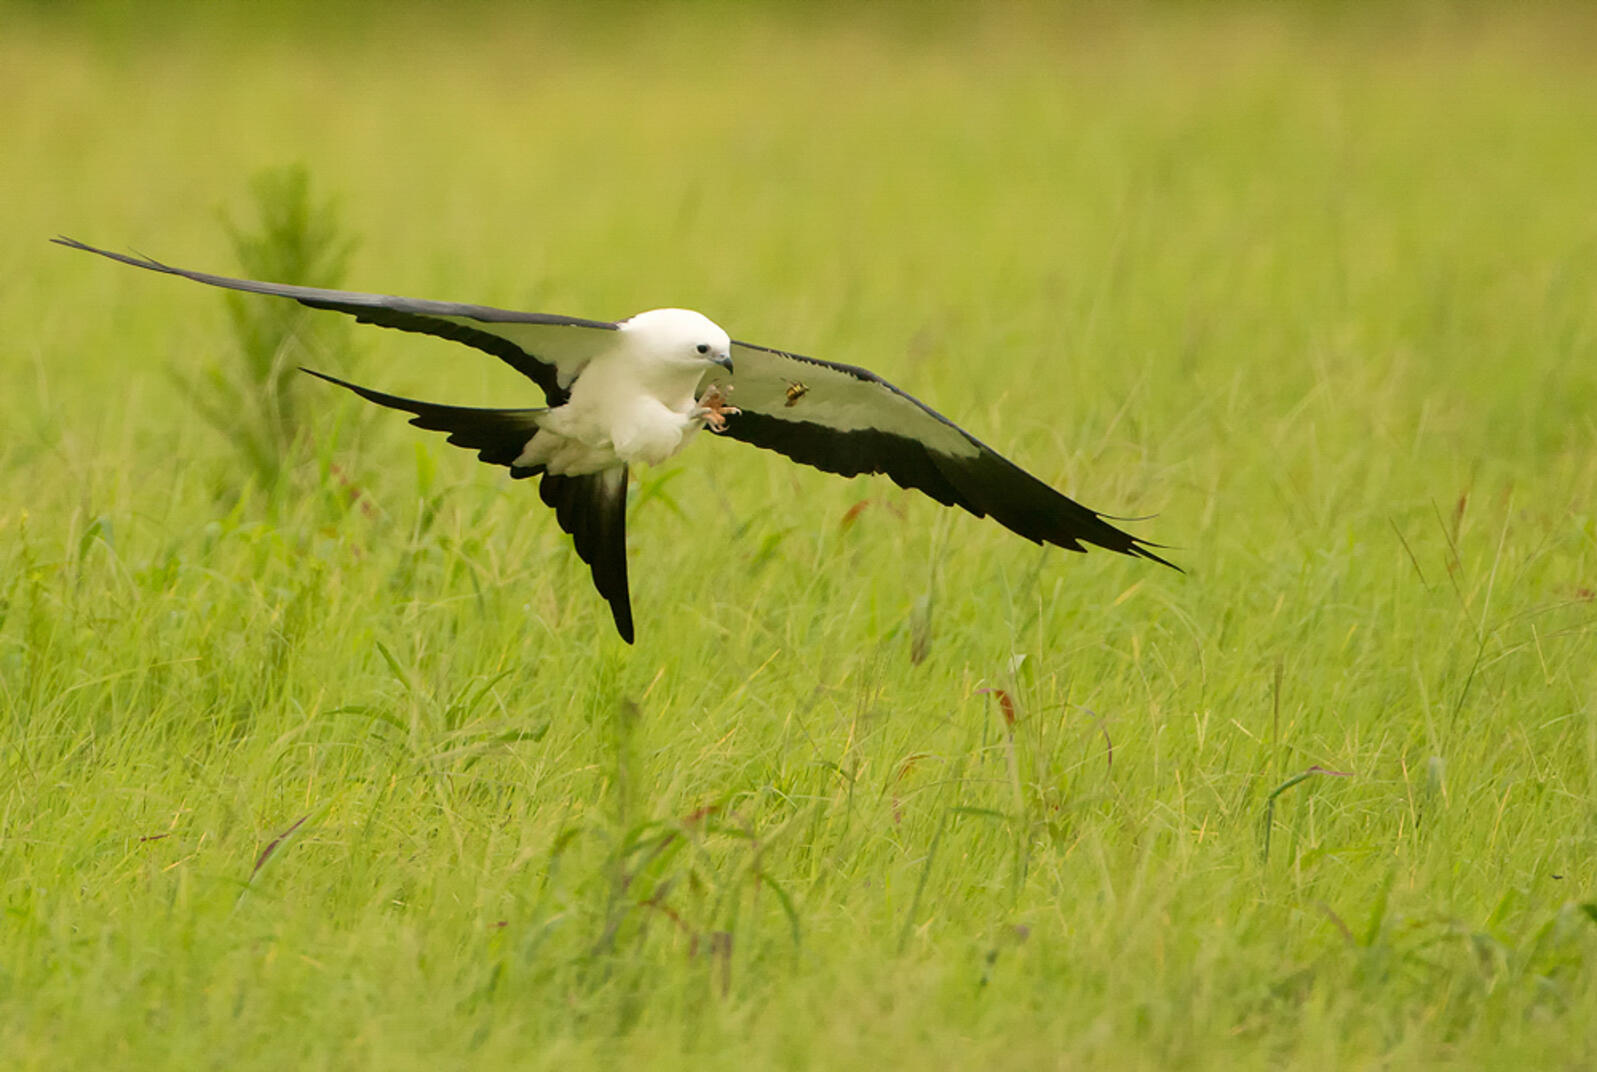 A large black and white bird catching a bug in mid air over a green field